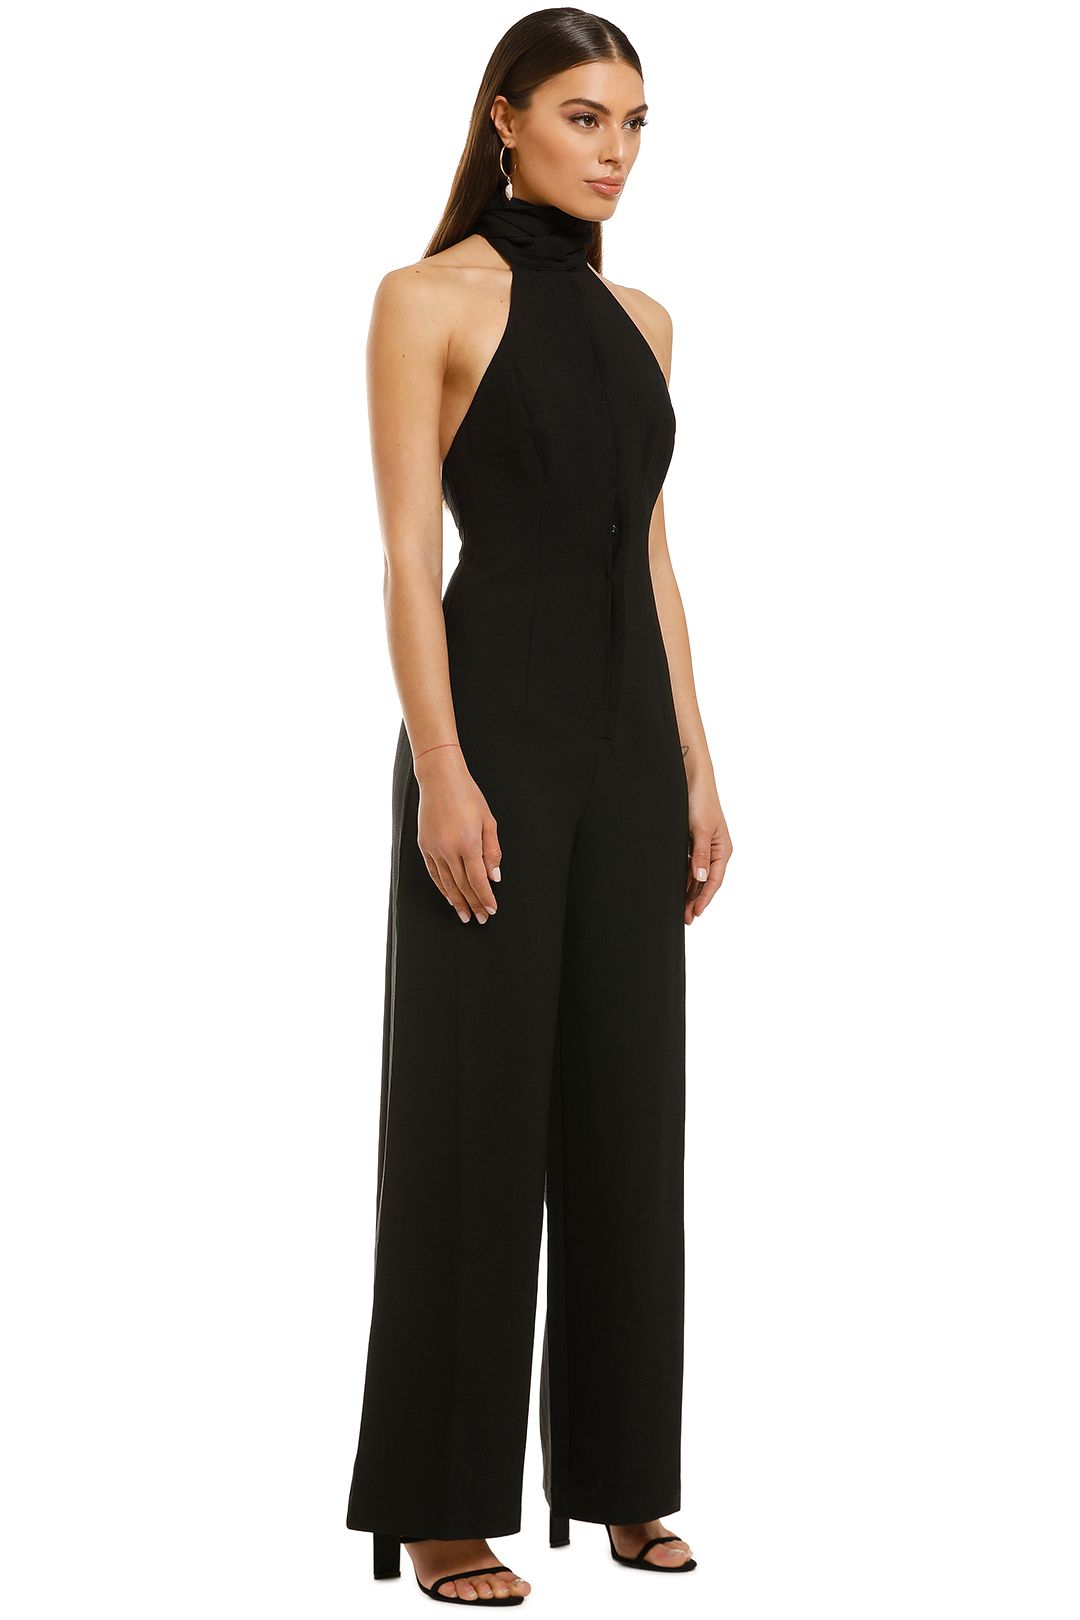 Chapter One Jumpsuit in Black by C/MEO Collective for Rent | GlamCorner